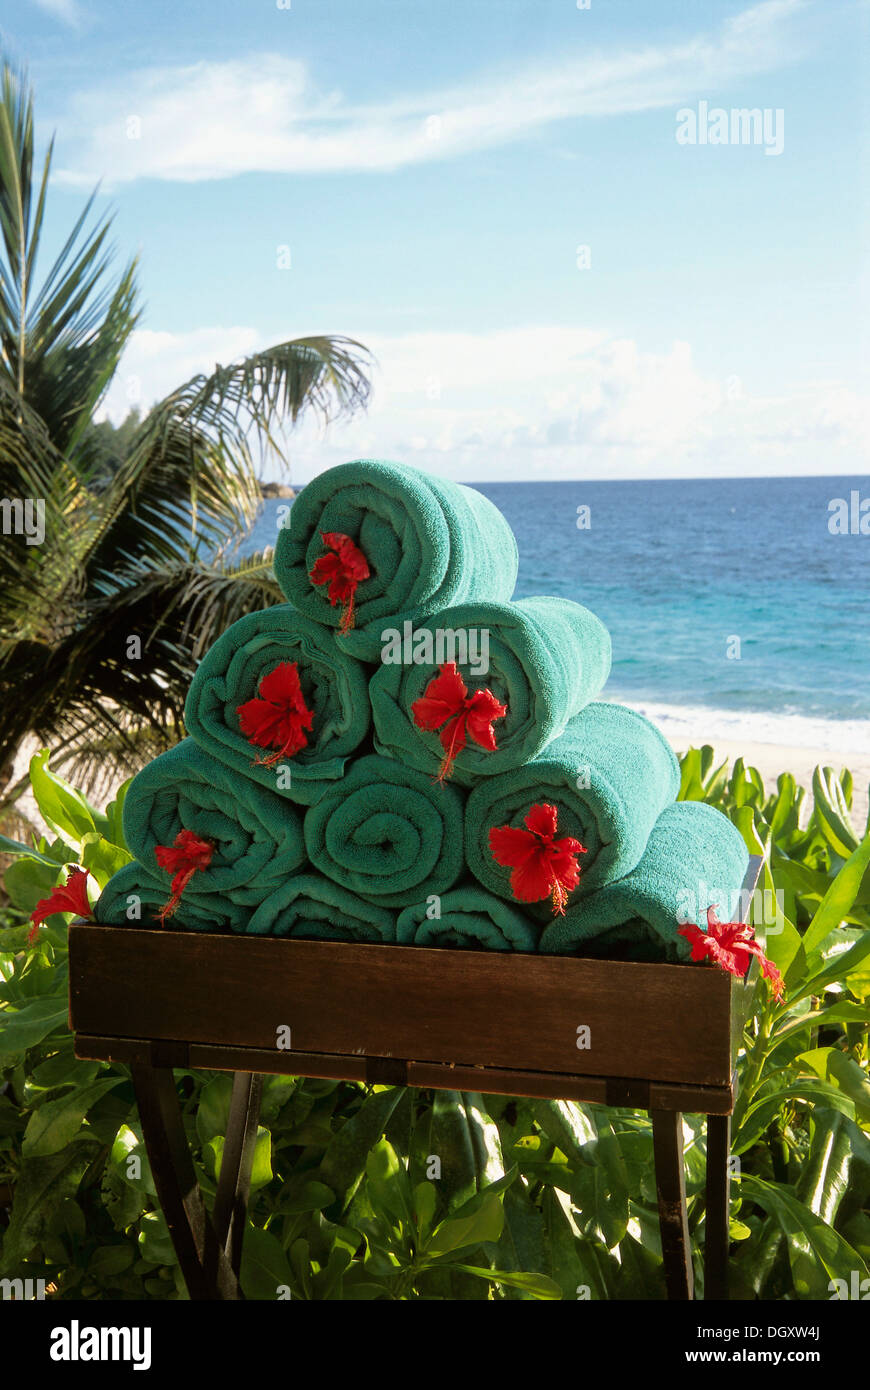 Stack of rolled towels with red flower on the beach, Mahe, Seychelles Stock Photo